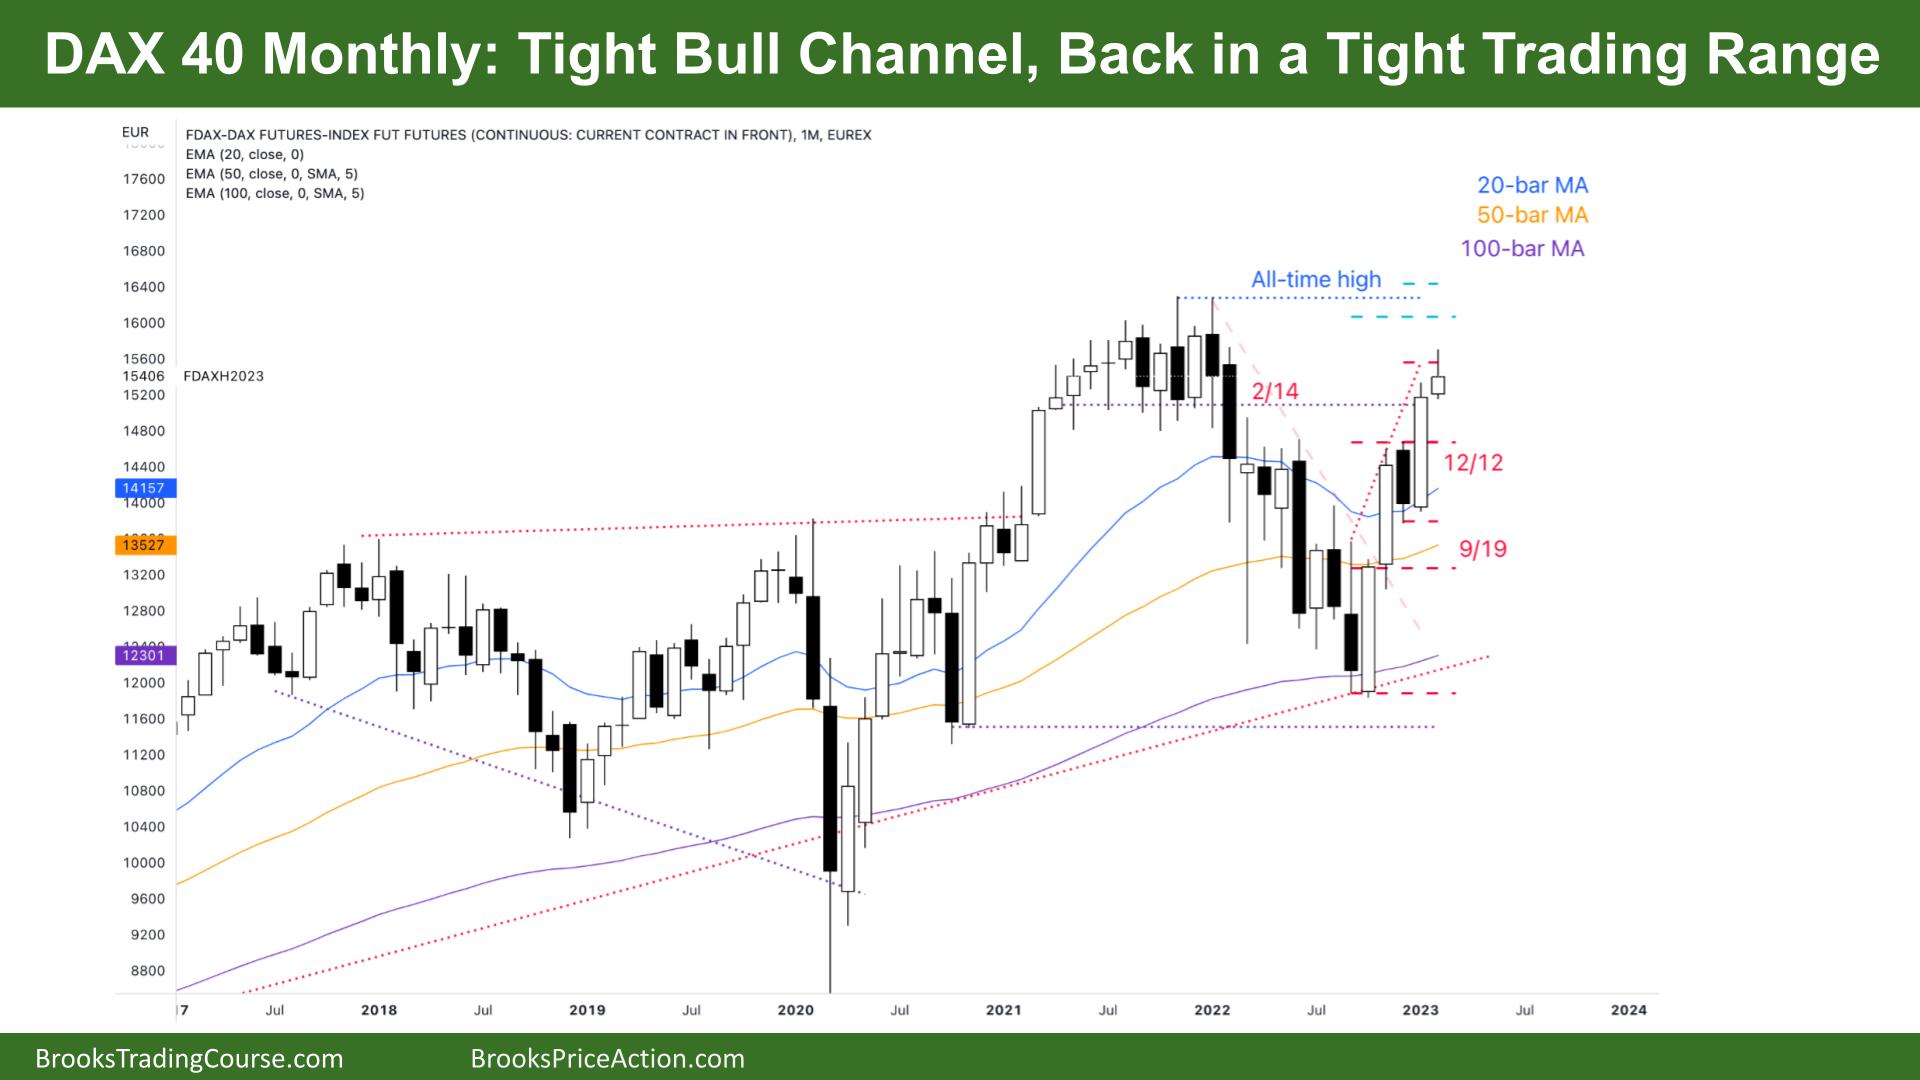 DAX 40 Tight Bull Channel, Back in Tight Trading Range